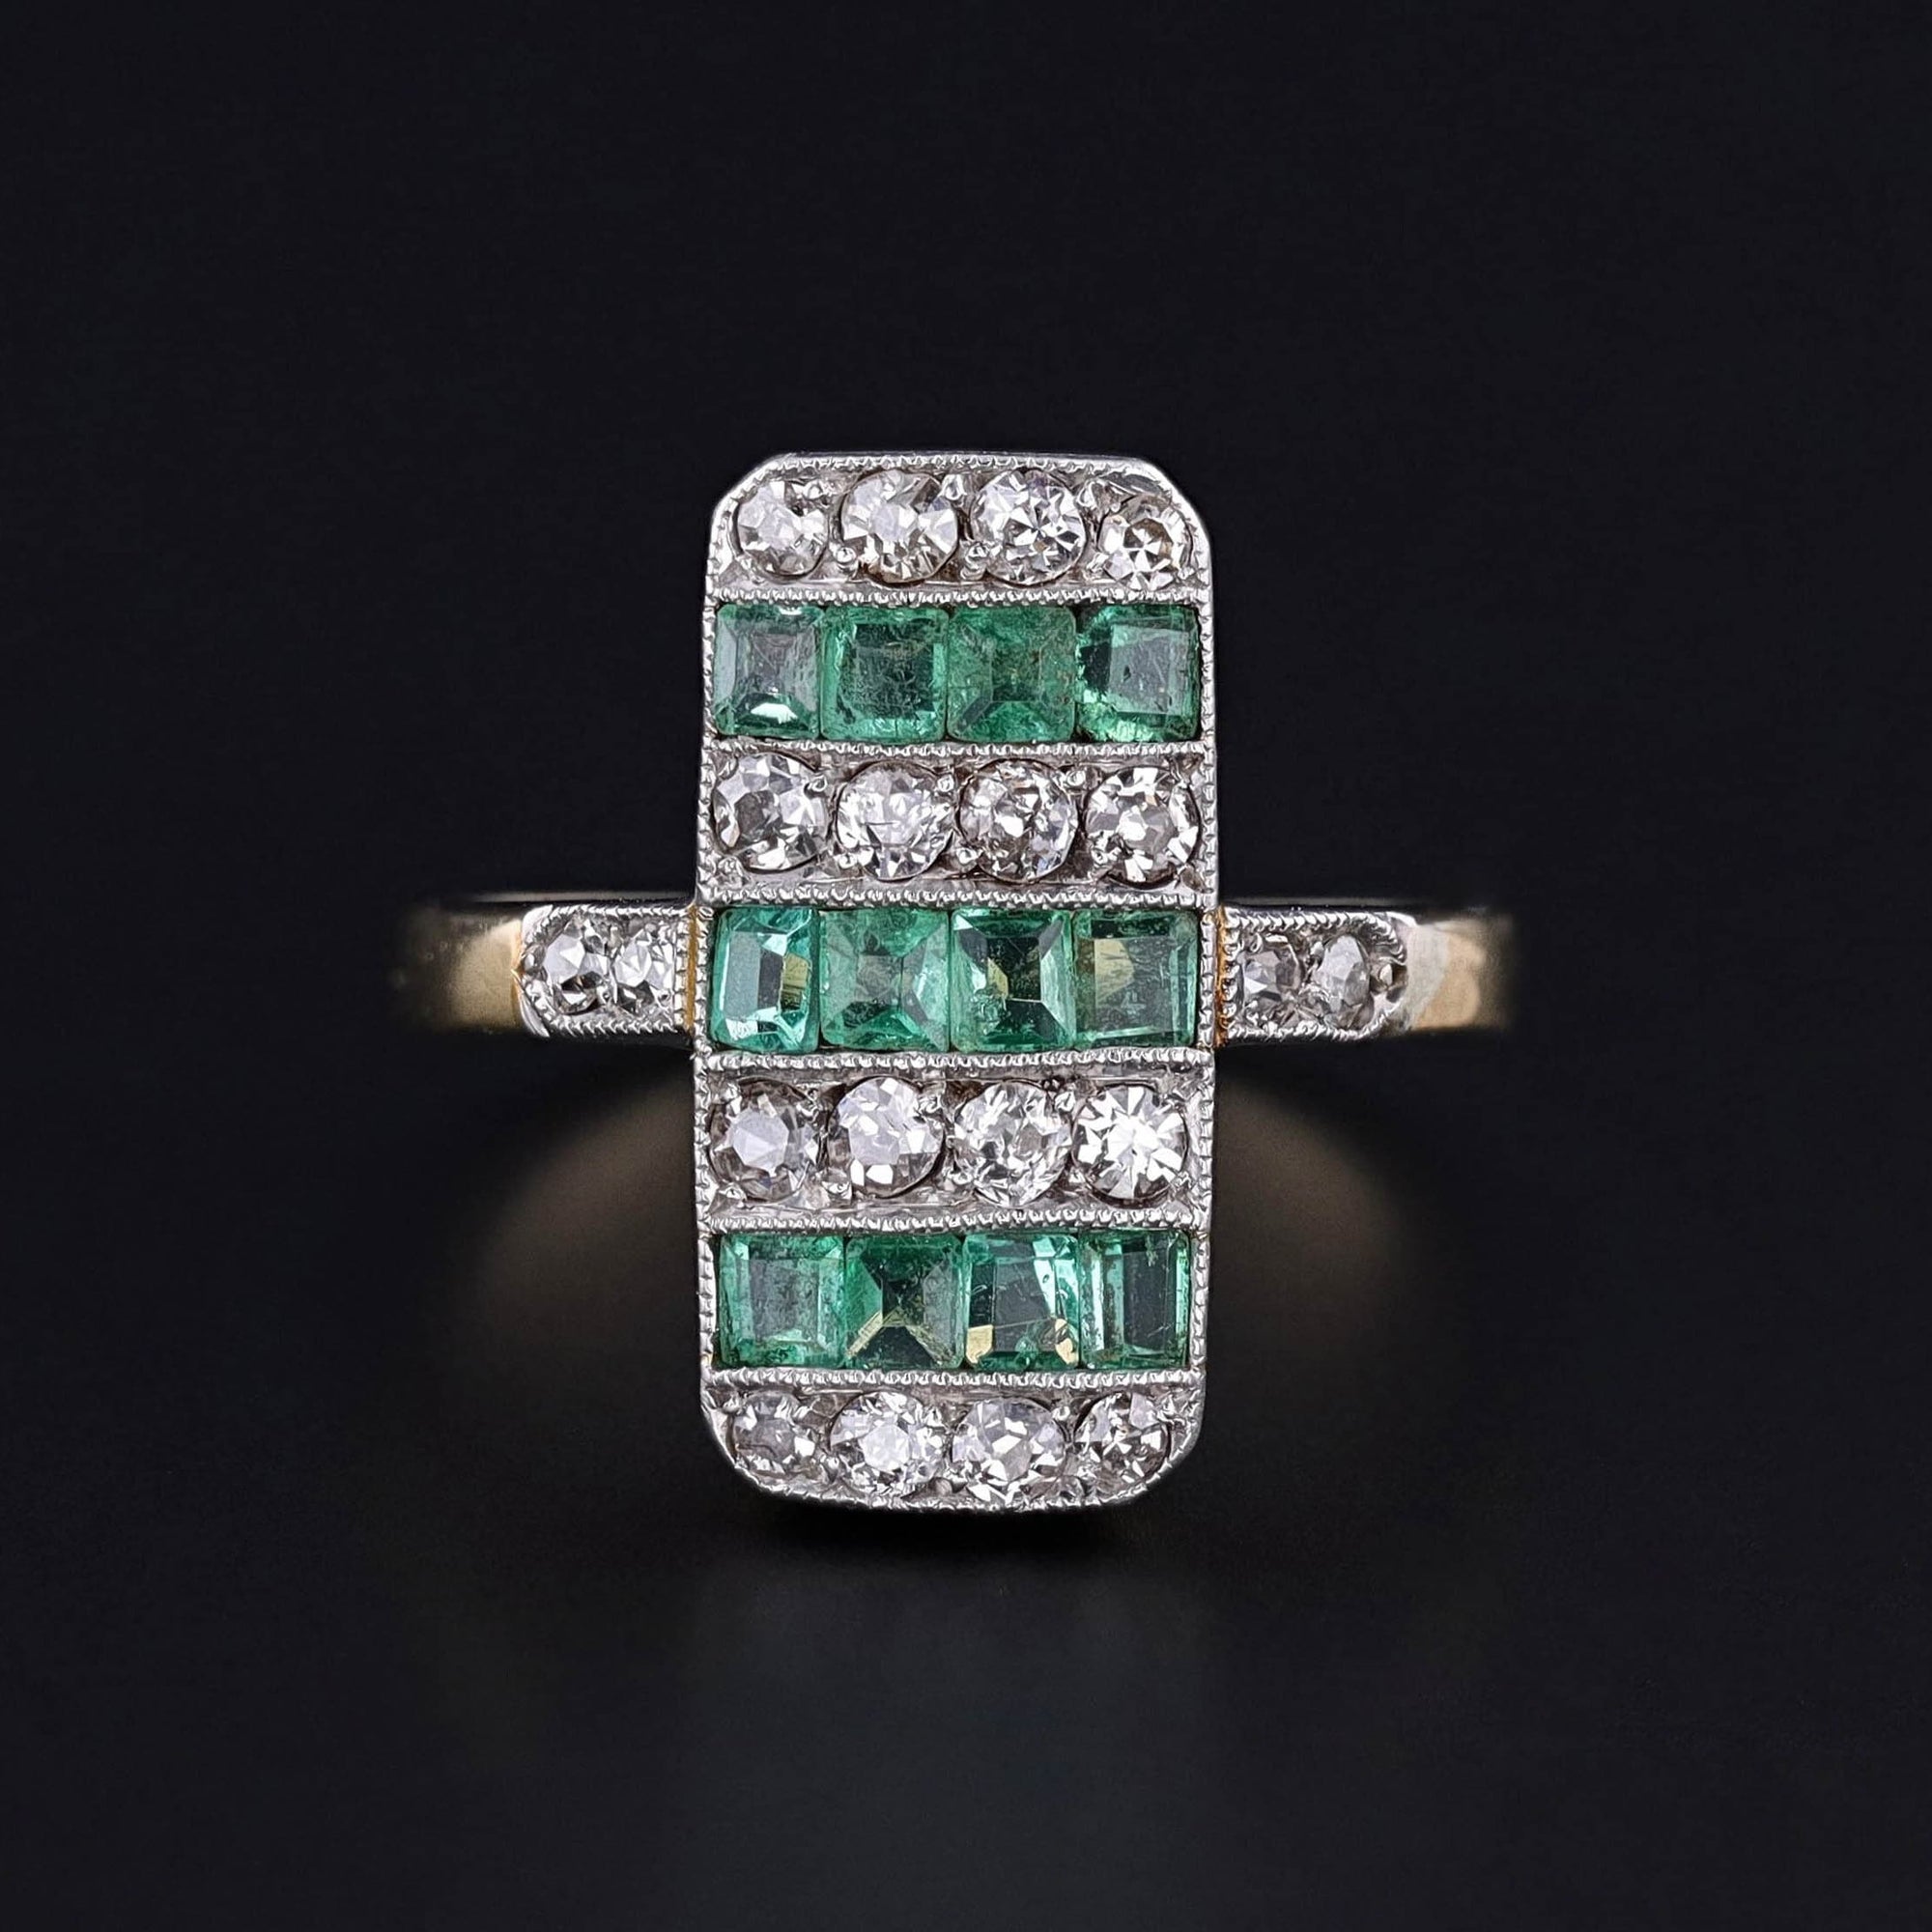 Antique Emerald and Diamond Ring of 18k Gold